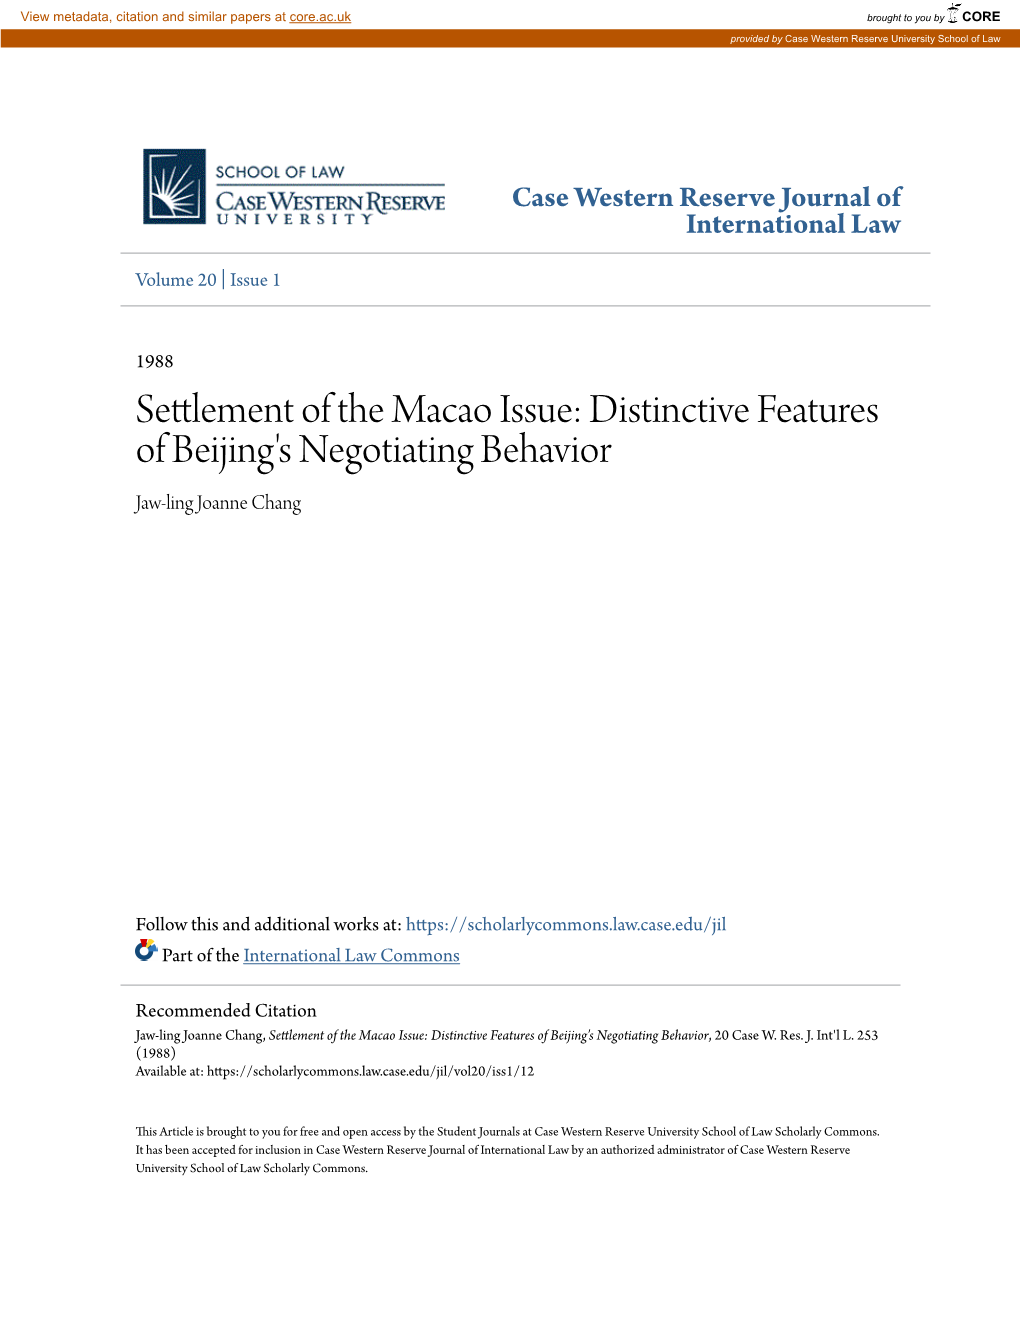 Settlement of the Macao Issue: Distinctive Features of Beijing's Negotiating Behavior Jaw-Ling Joanne Chang